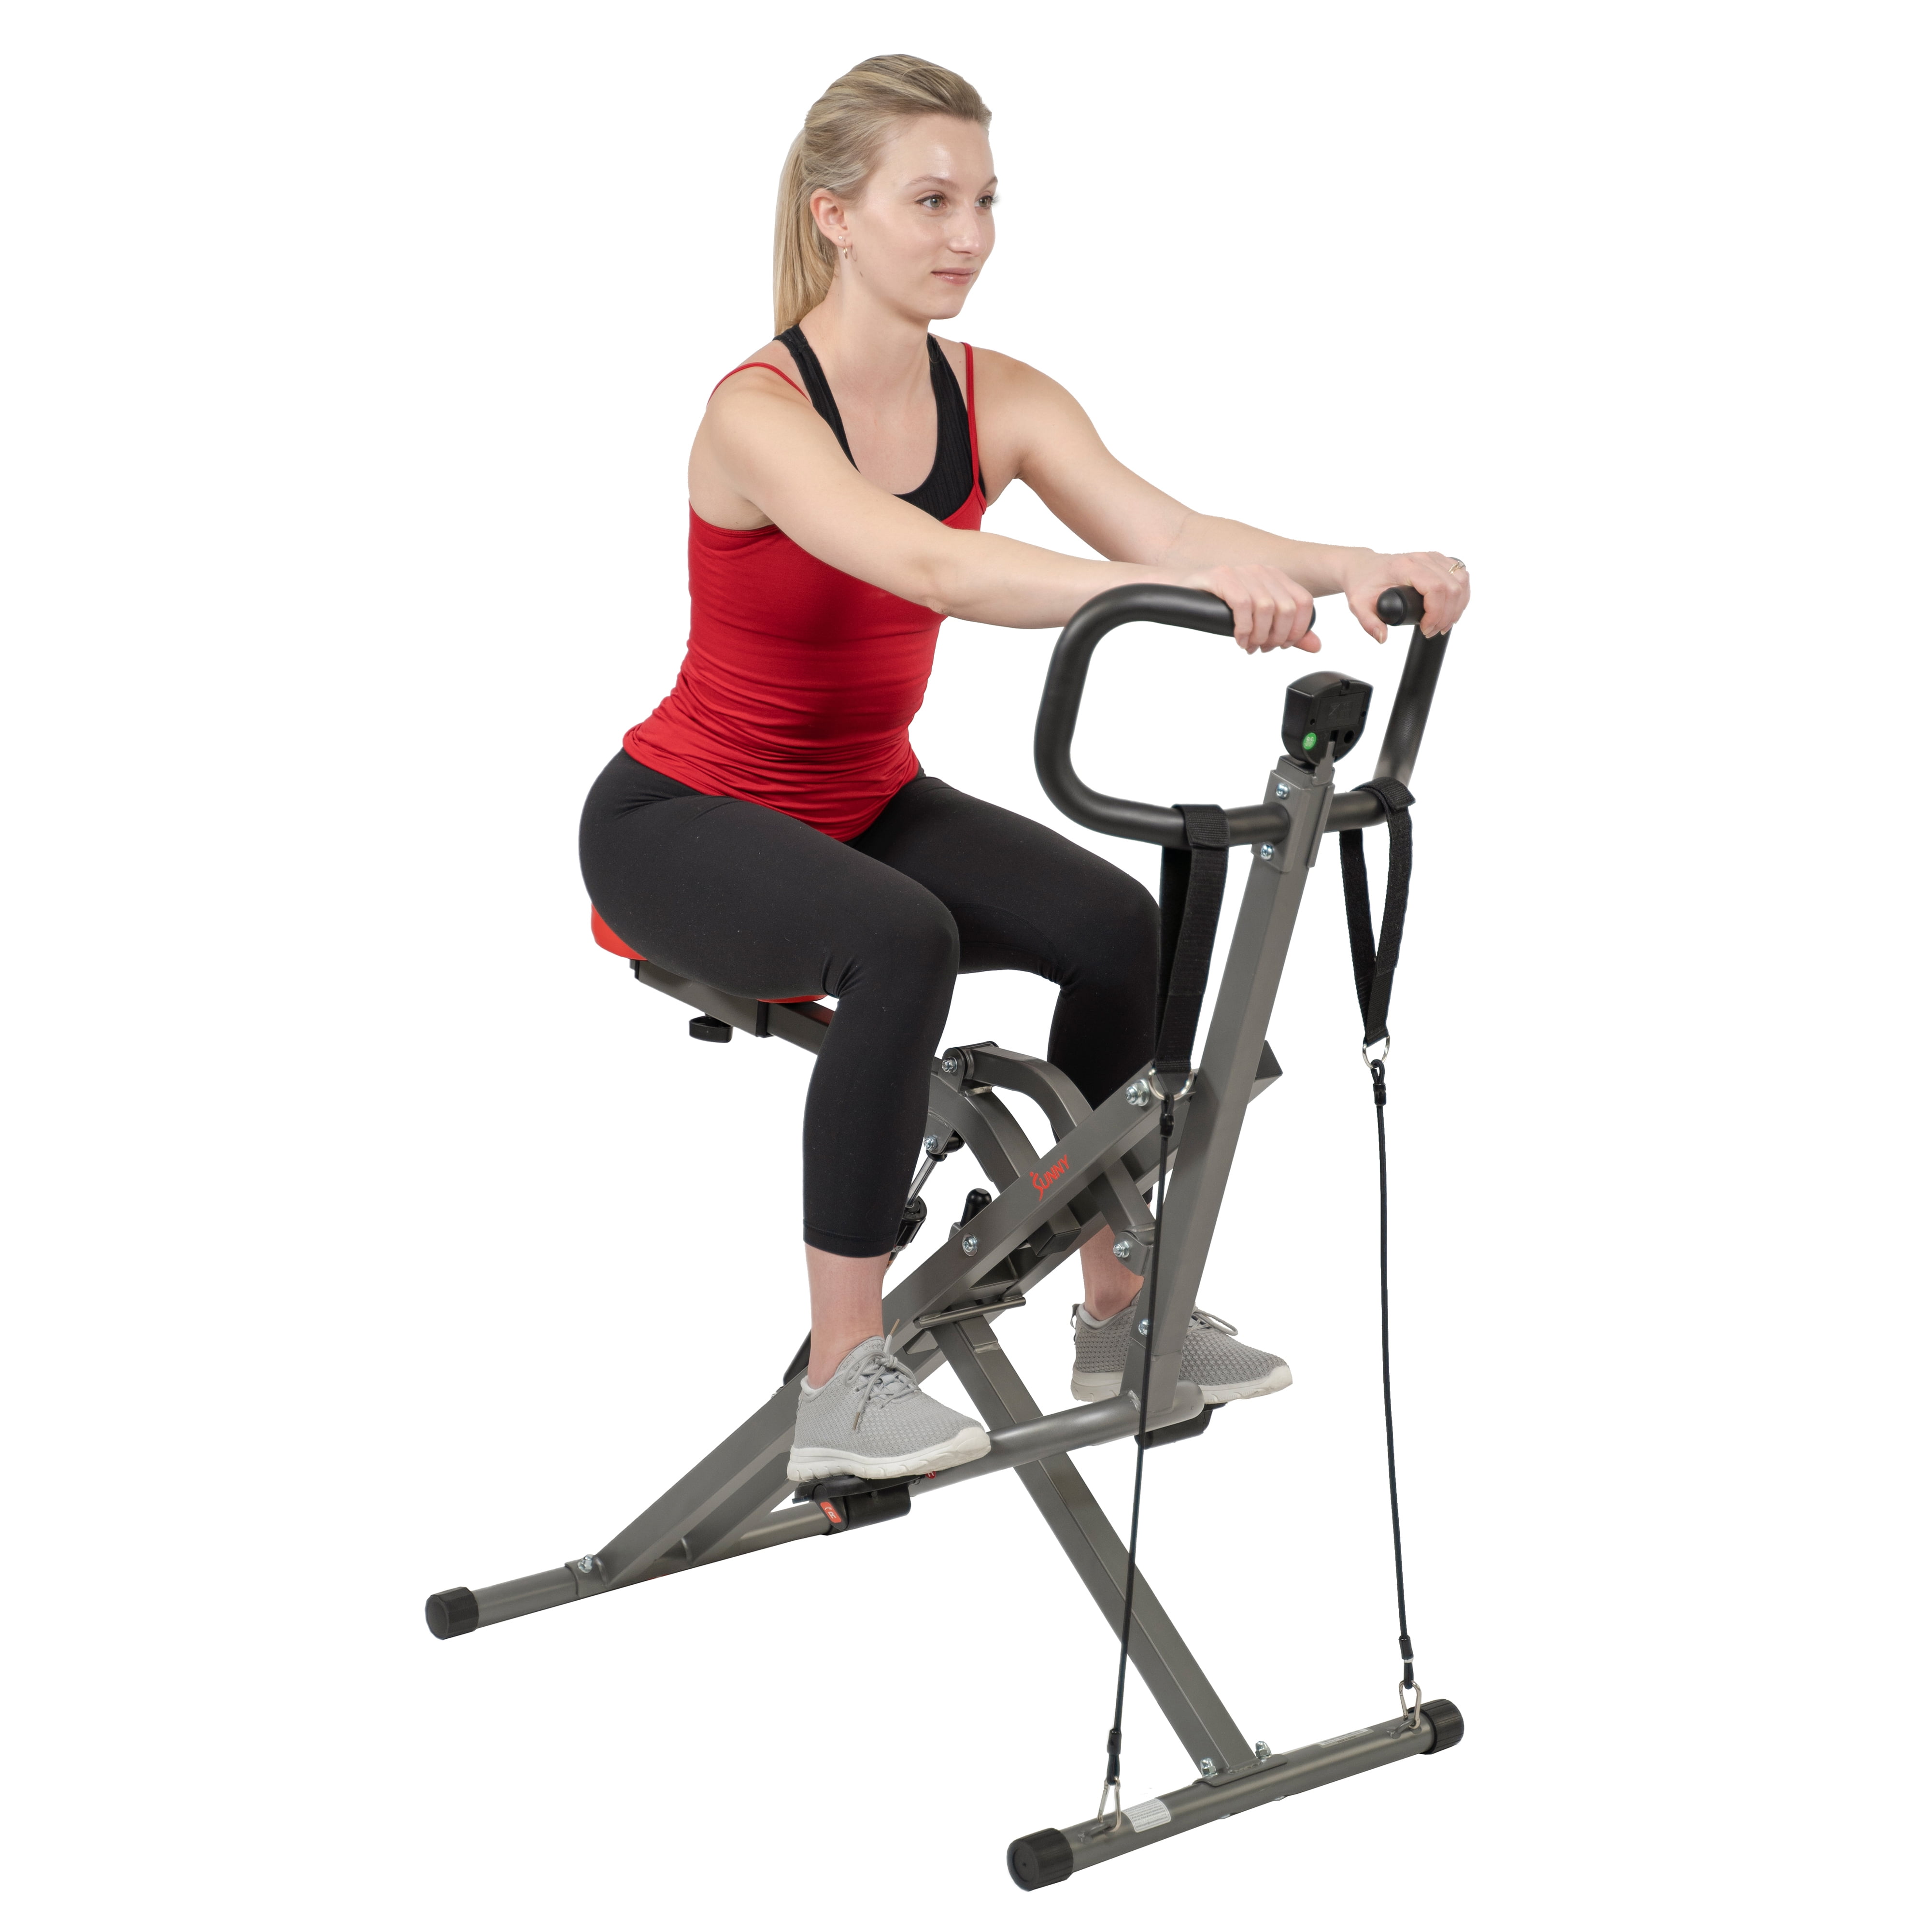 Sunny Health & Fitness Squat Assist Row-N-Ride Trainer for Glutes Workout 